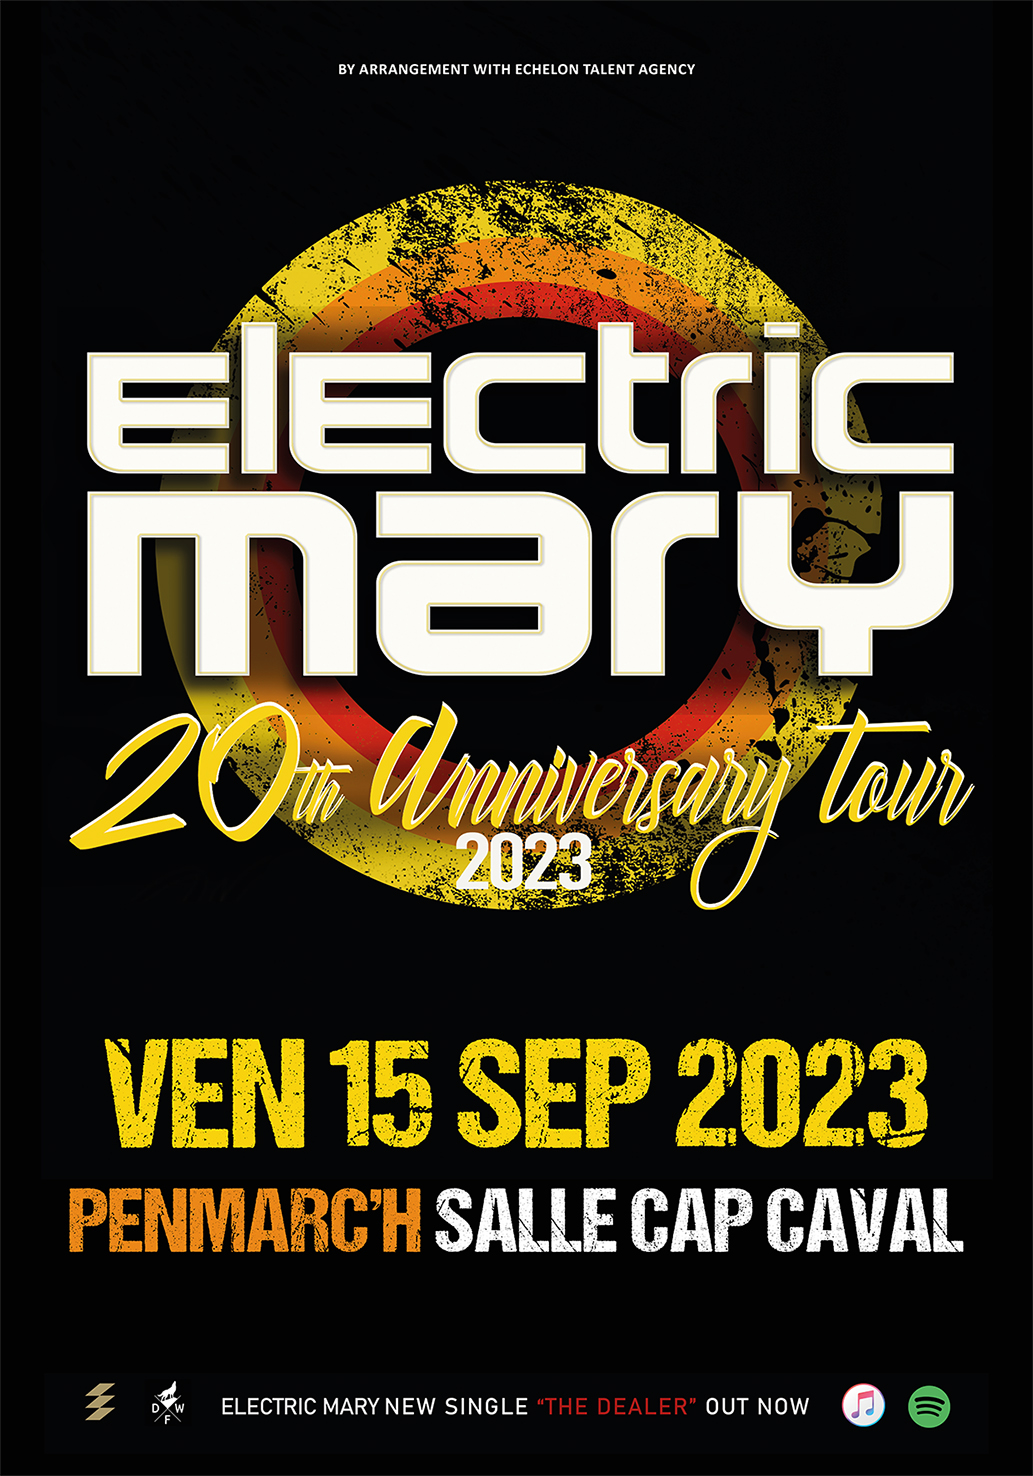 Electric Mary, The Mercury Riots Concert rock - Salle Cap Caval